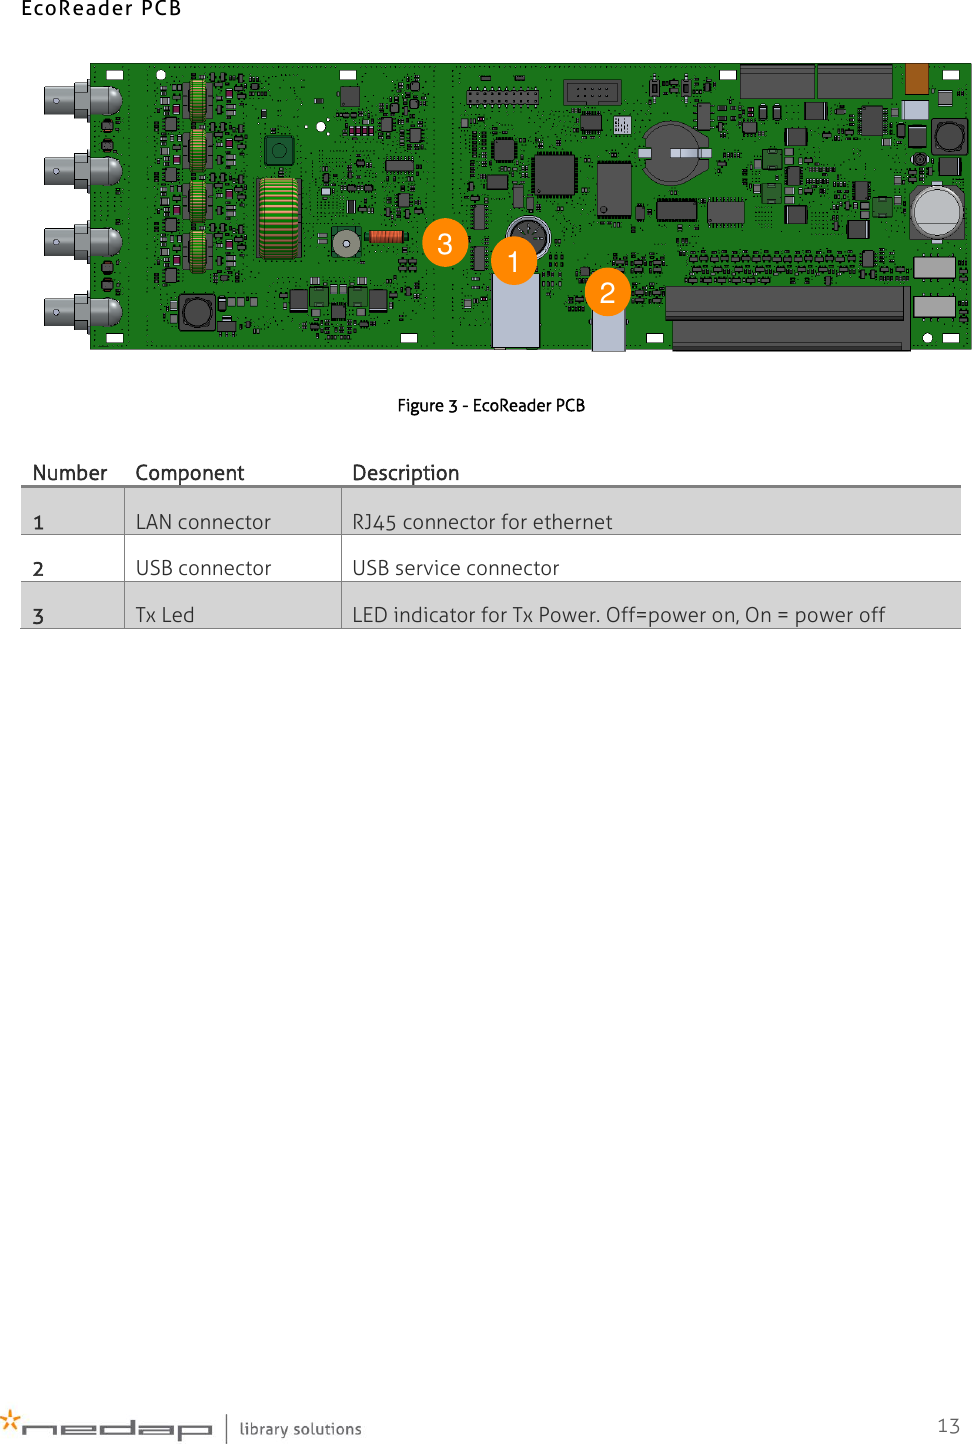    13  EcoReader PCB  Figure 3 - EcoReader PCB Number Component Description 1 LAN connector RJ45 connector for ethernet 2 USB connector USB service connector 3 Tx Led LED indicator for Tx Power. Off=power on, On = power off   1 2 3 